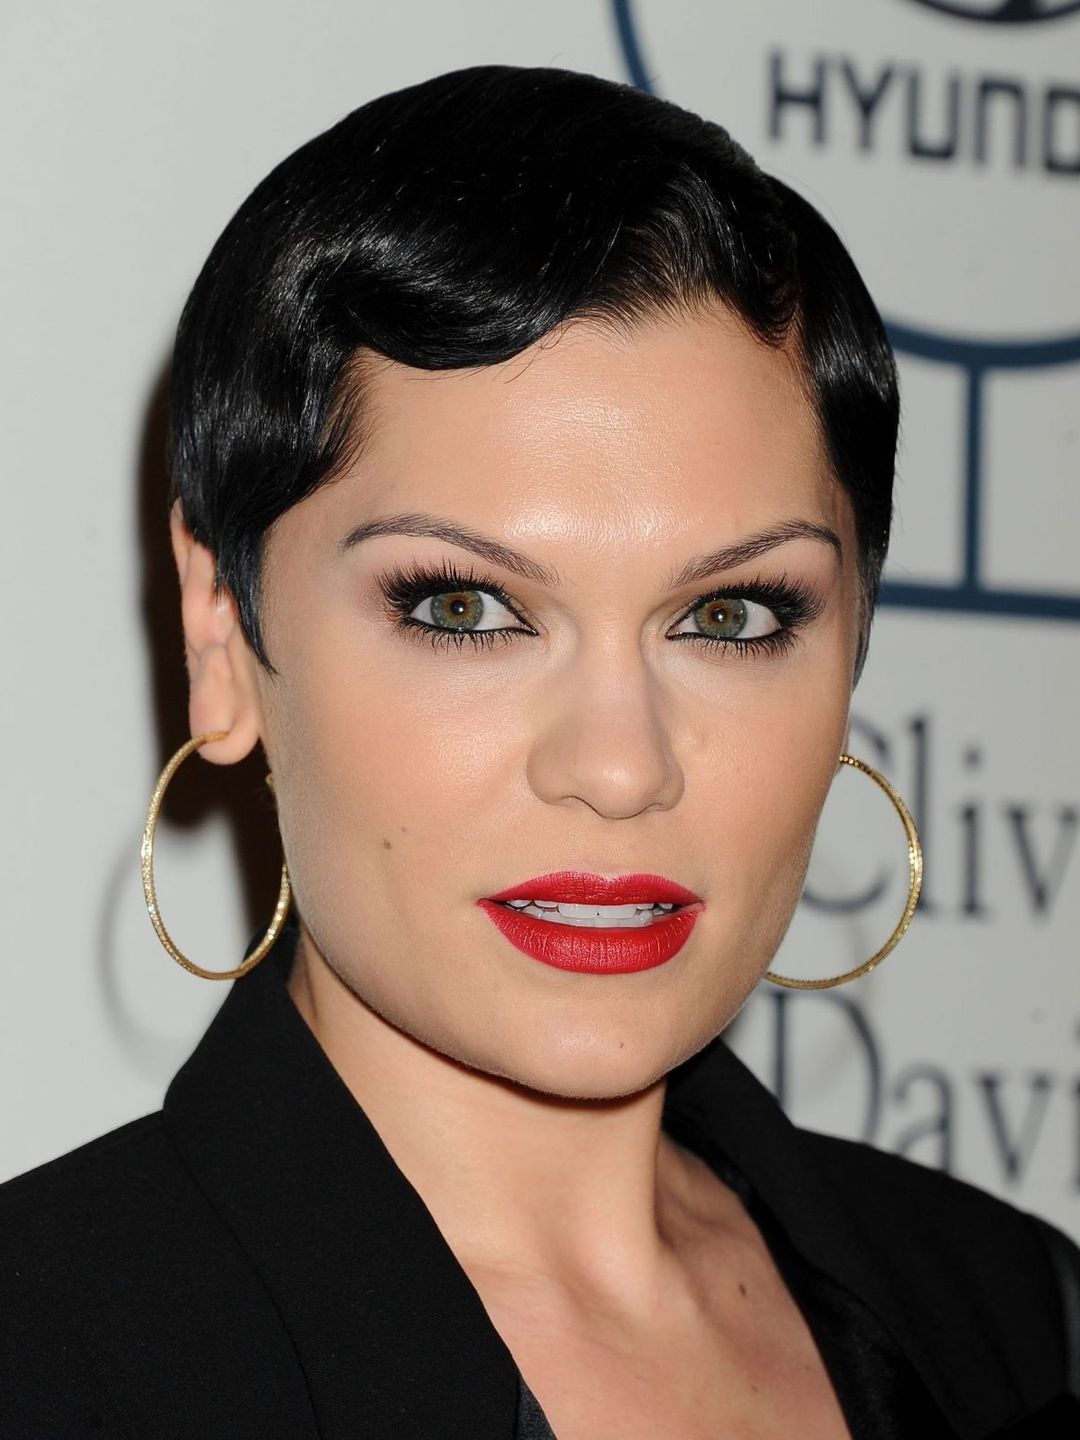 Jessie J how old is she